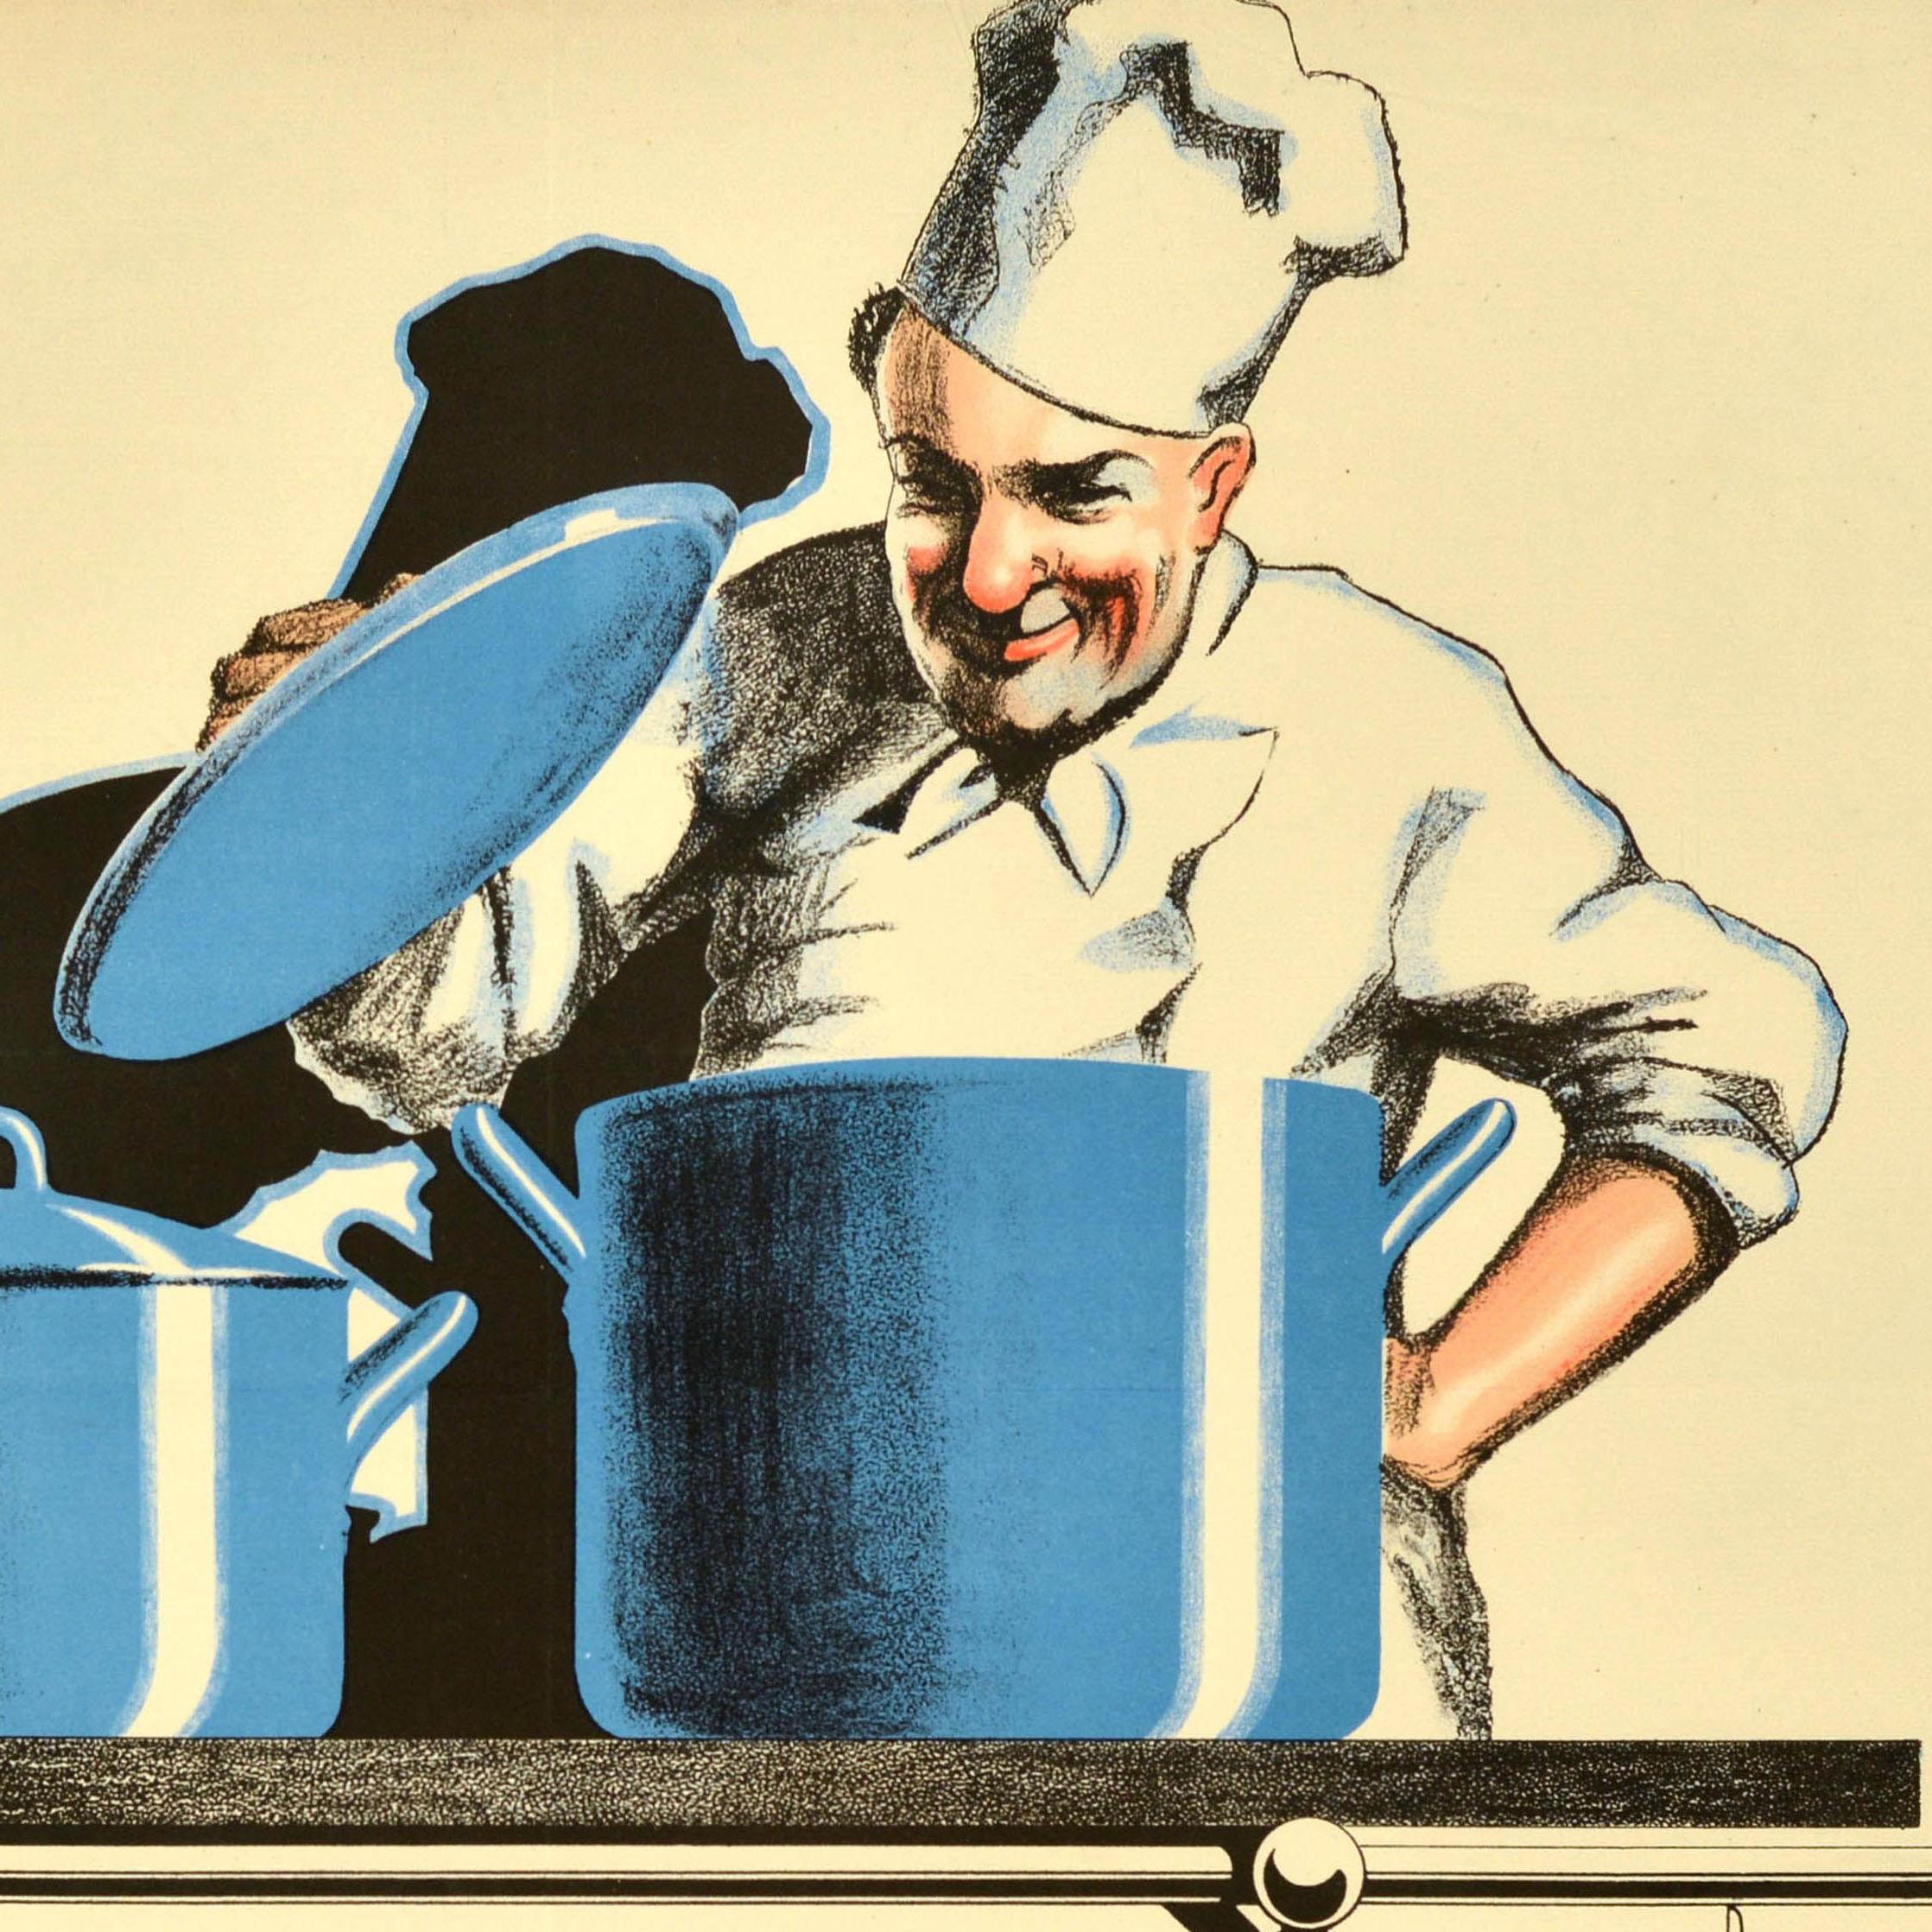 Original antique advertising poster for cooking with gas featuring an illustration of a smiling chef in white uniform and hat lifting a lid off a large blue cast iron pot on a stove with the caption below in stylised German lettering - nur mit Gass!